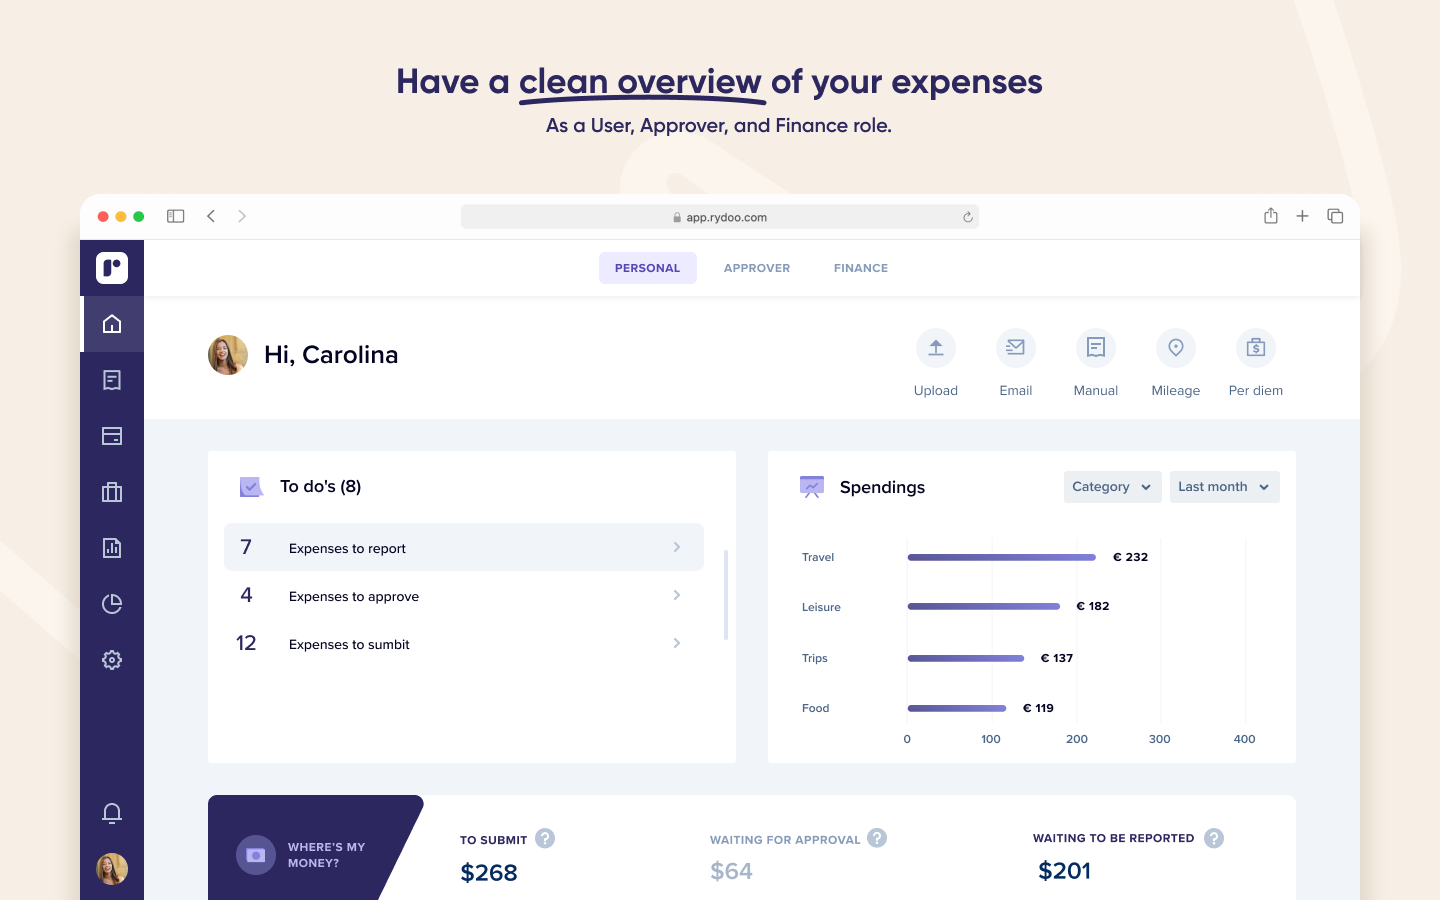 Rydoo - Have a clean overview of your expenses: As a user, approver and finance role.